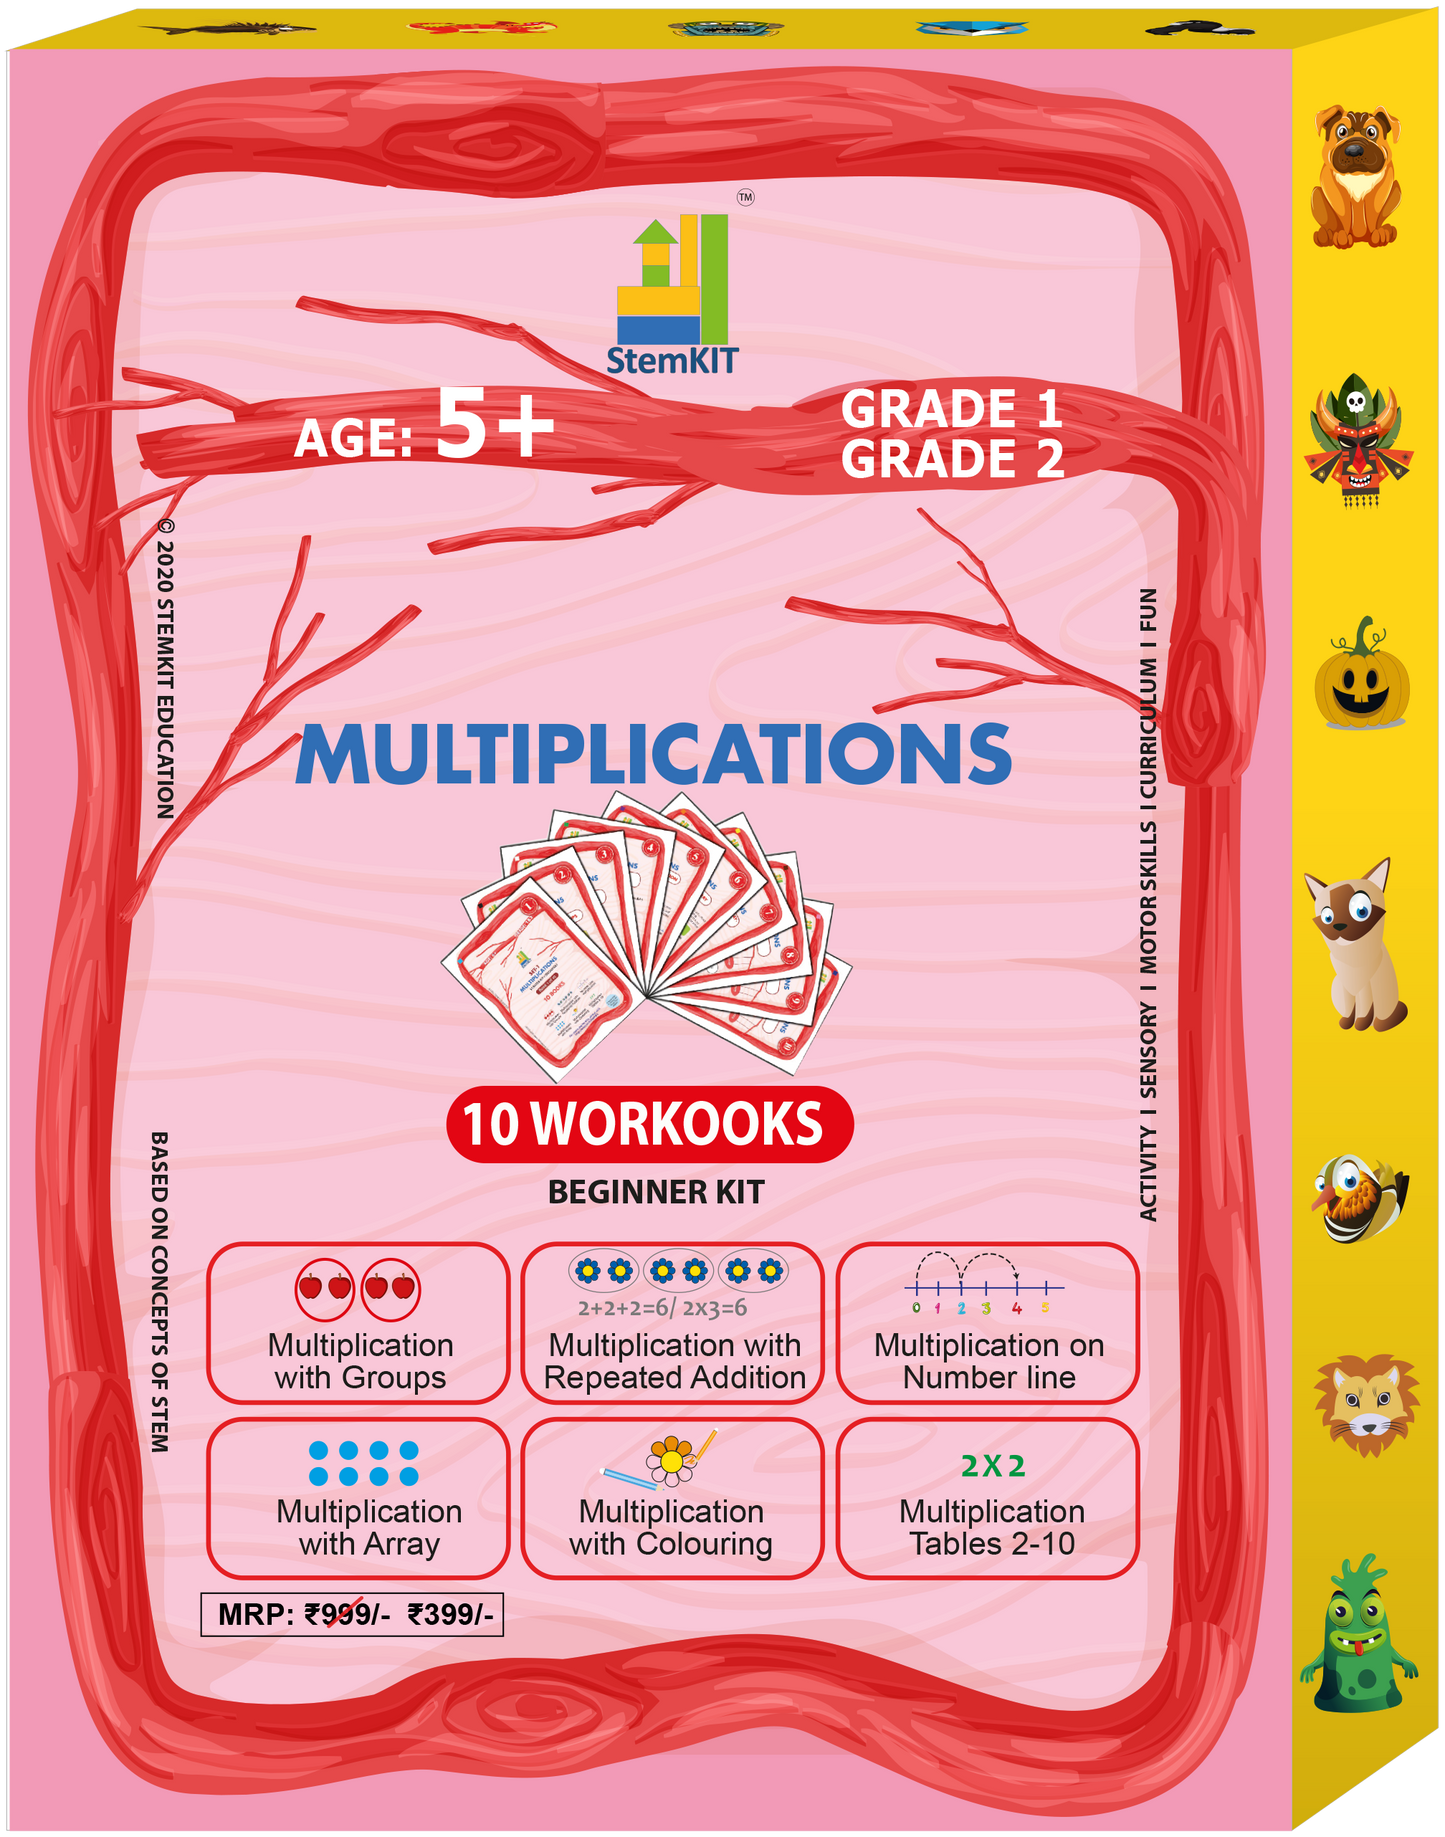 Stemkit Learn Multiplication with mental practies for beginners |10 Workbooks for 4-5+ Year Olds - Activity Oriented